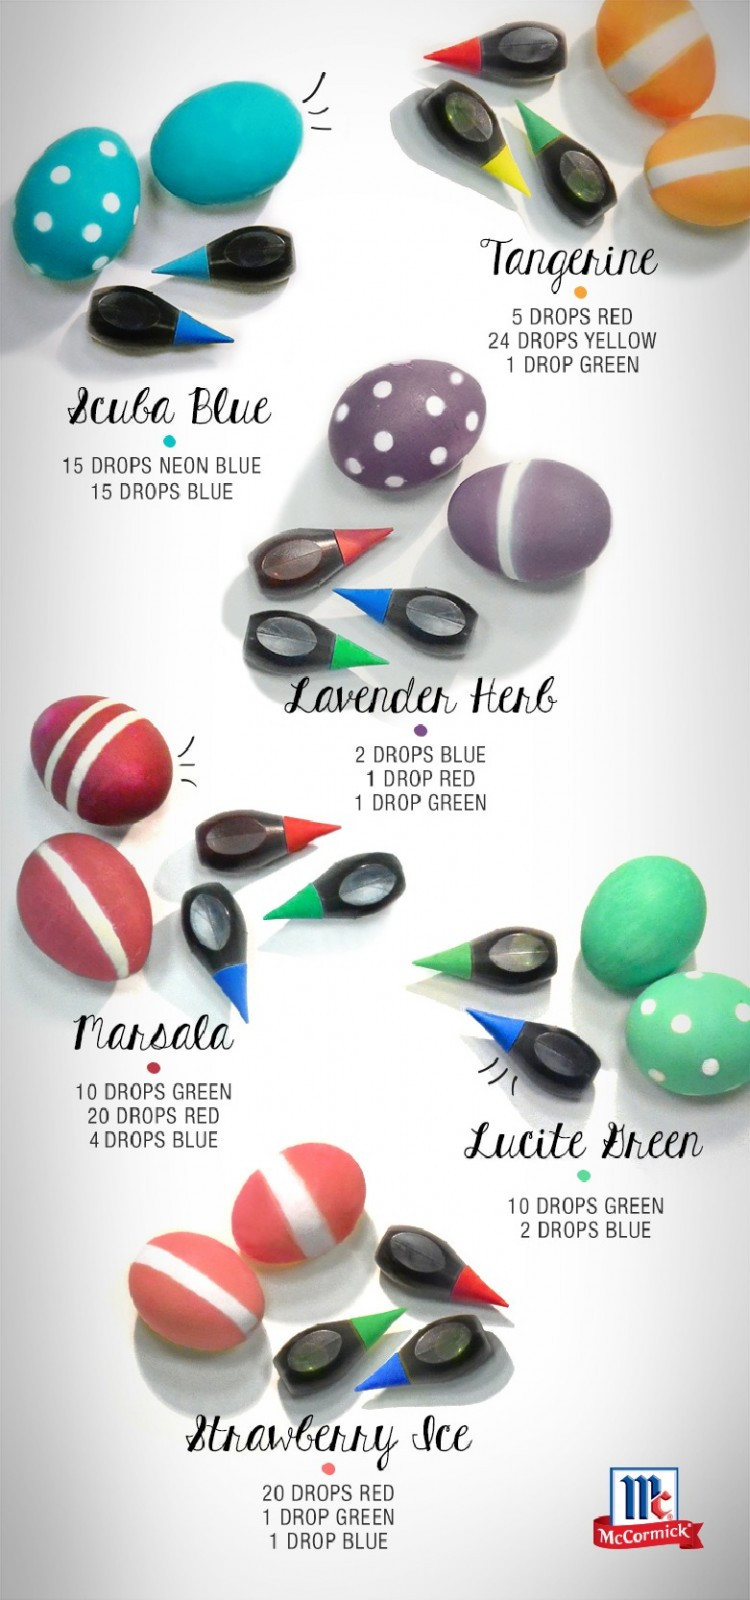 Easter Egg Dye Food Coloring Chart
 How to Dye Easter Eggs with Food Coloring Instead of Kits